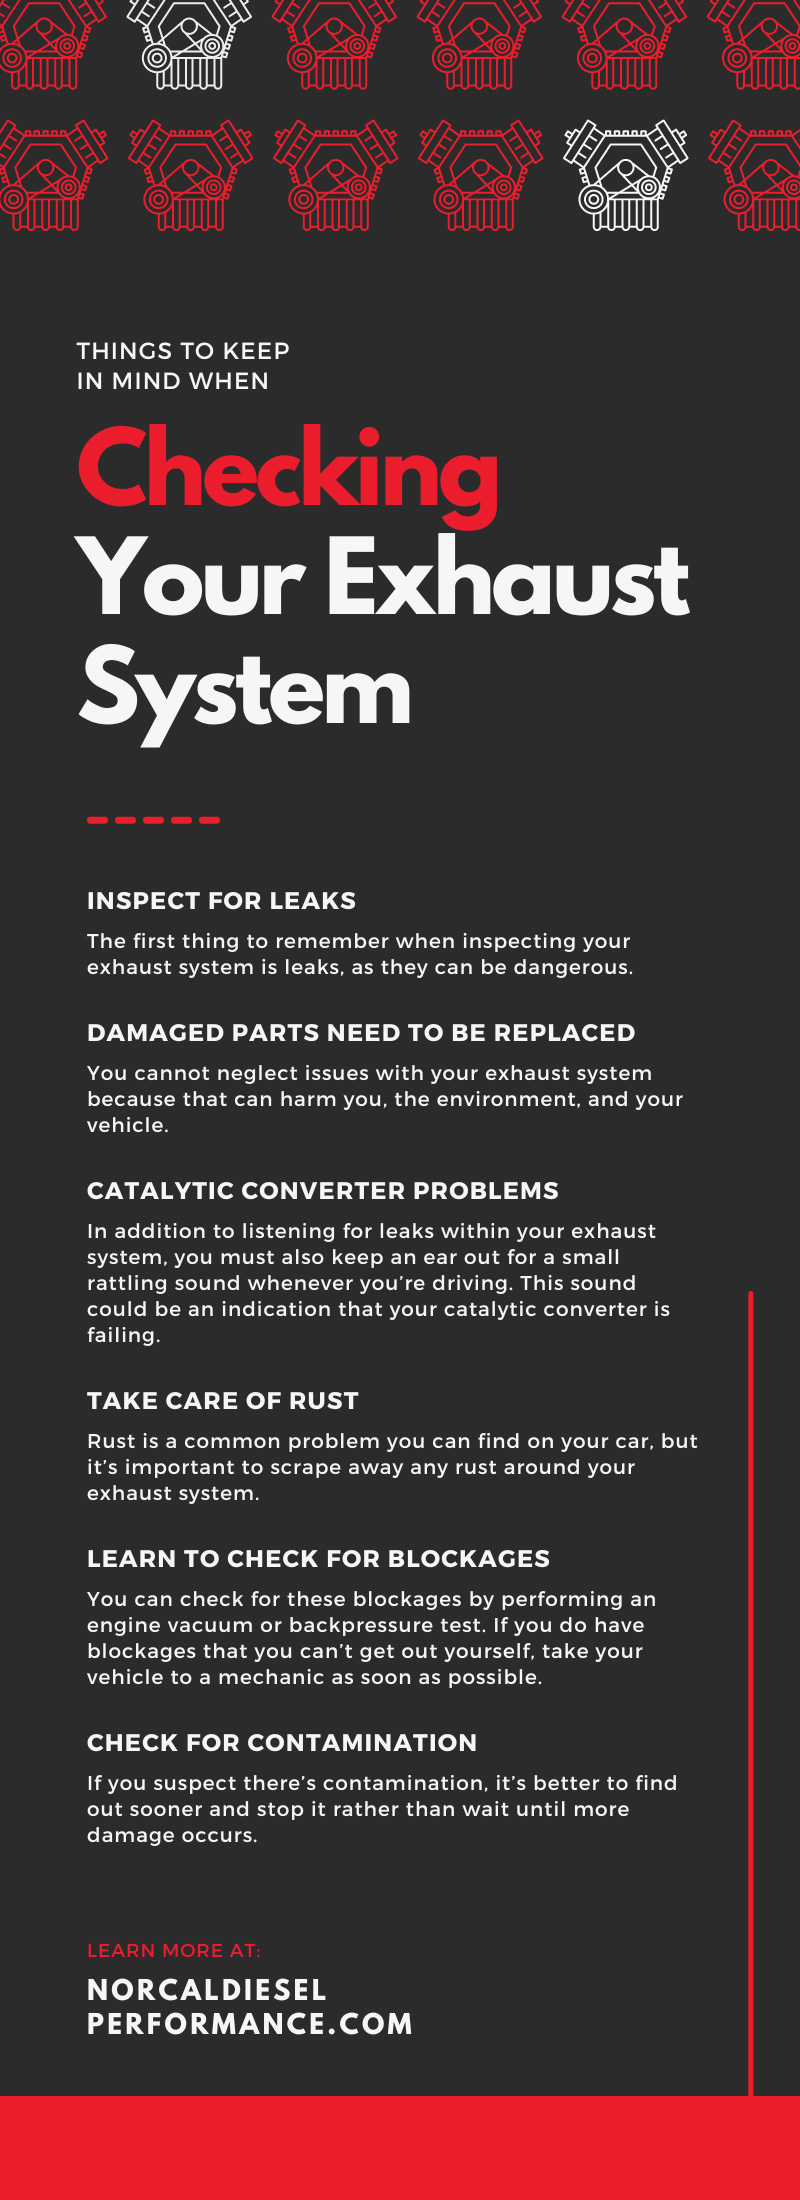 7 Things To Keep in Mind When Checking Your Exhaust System